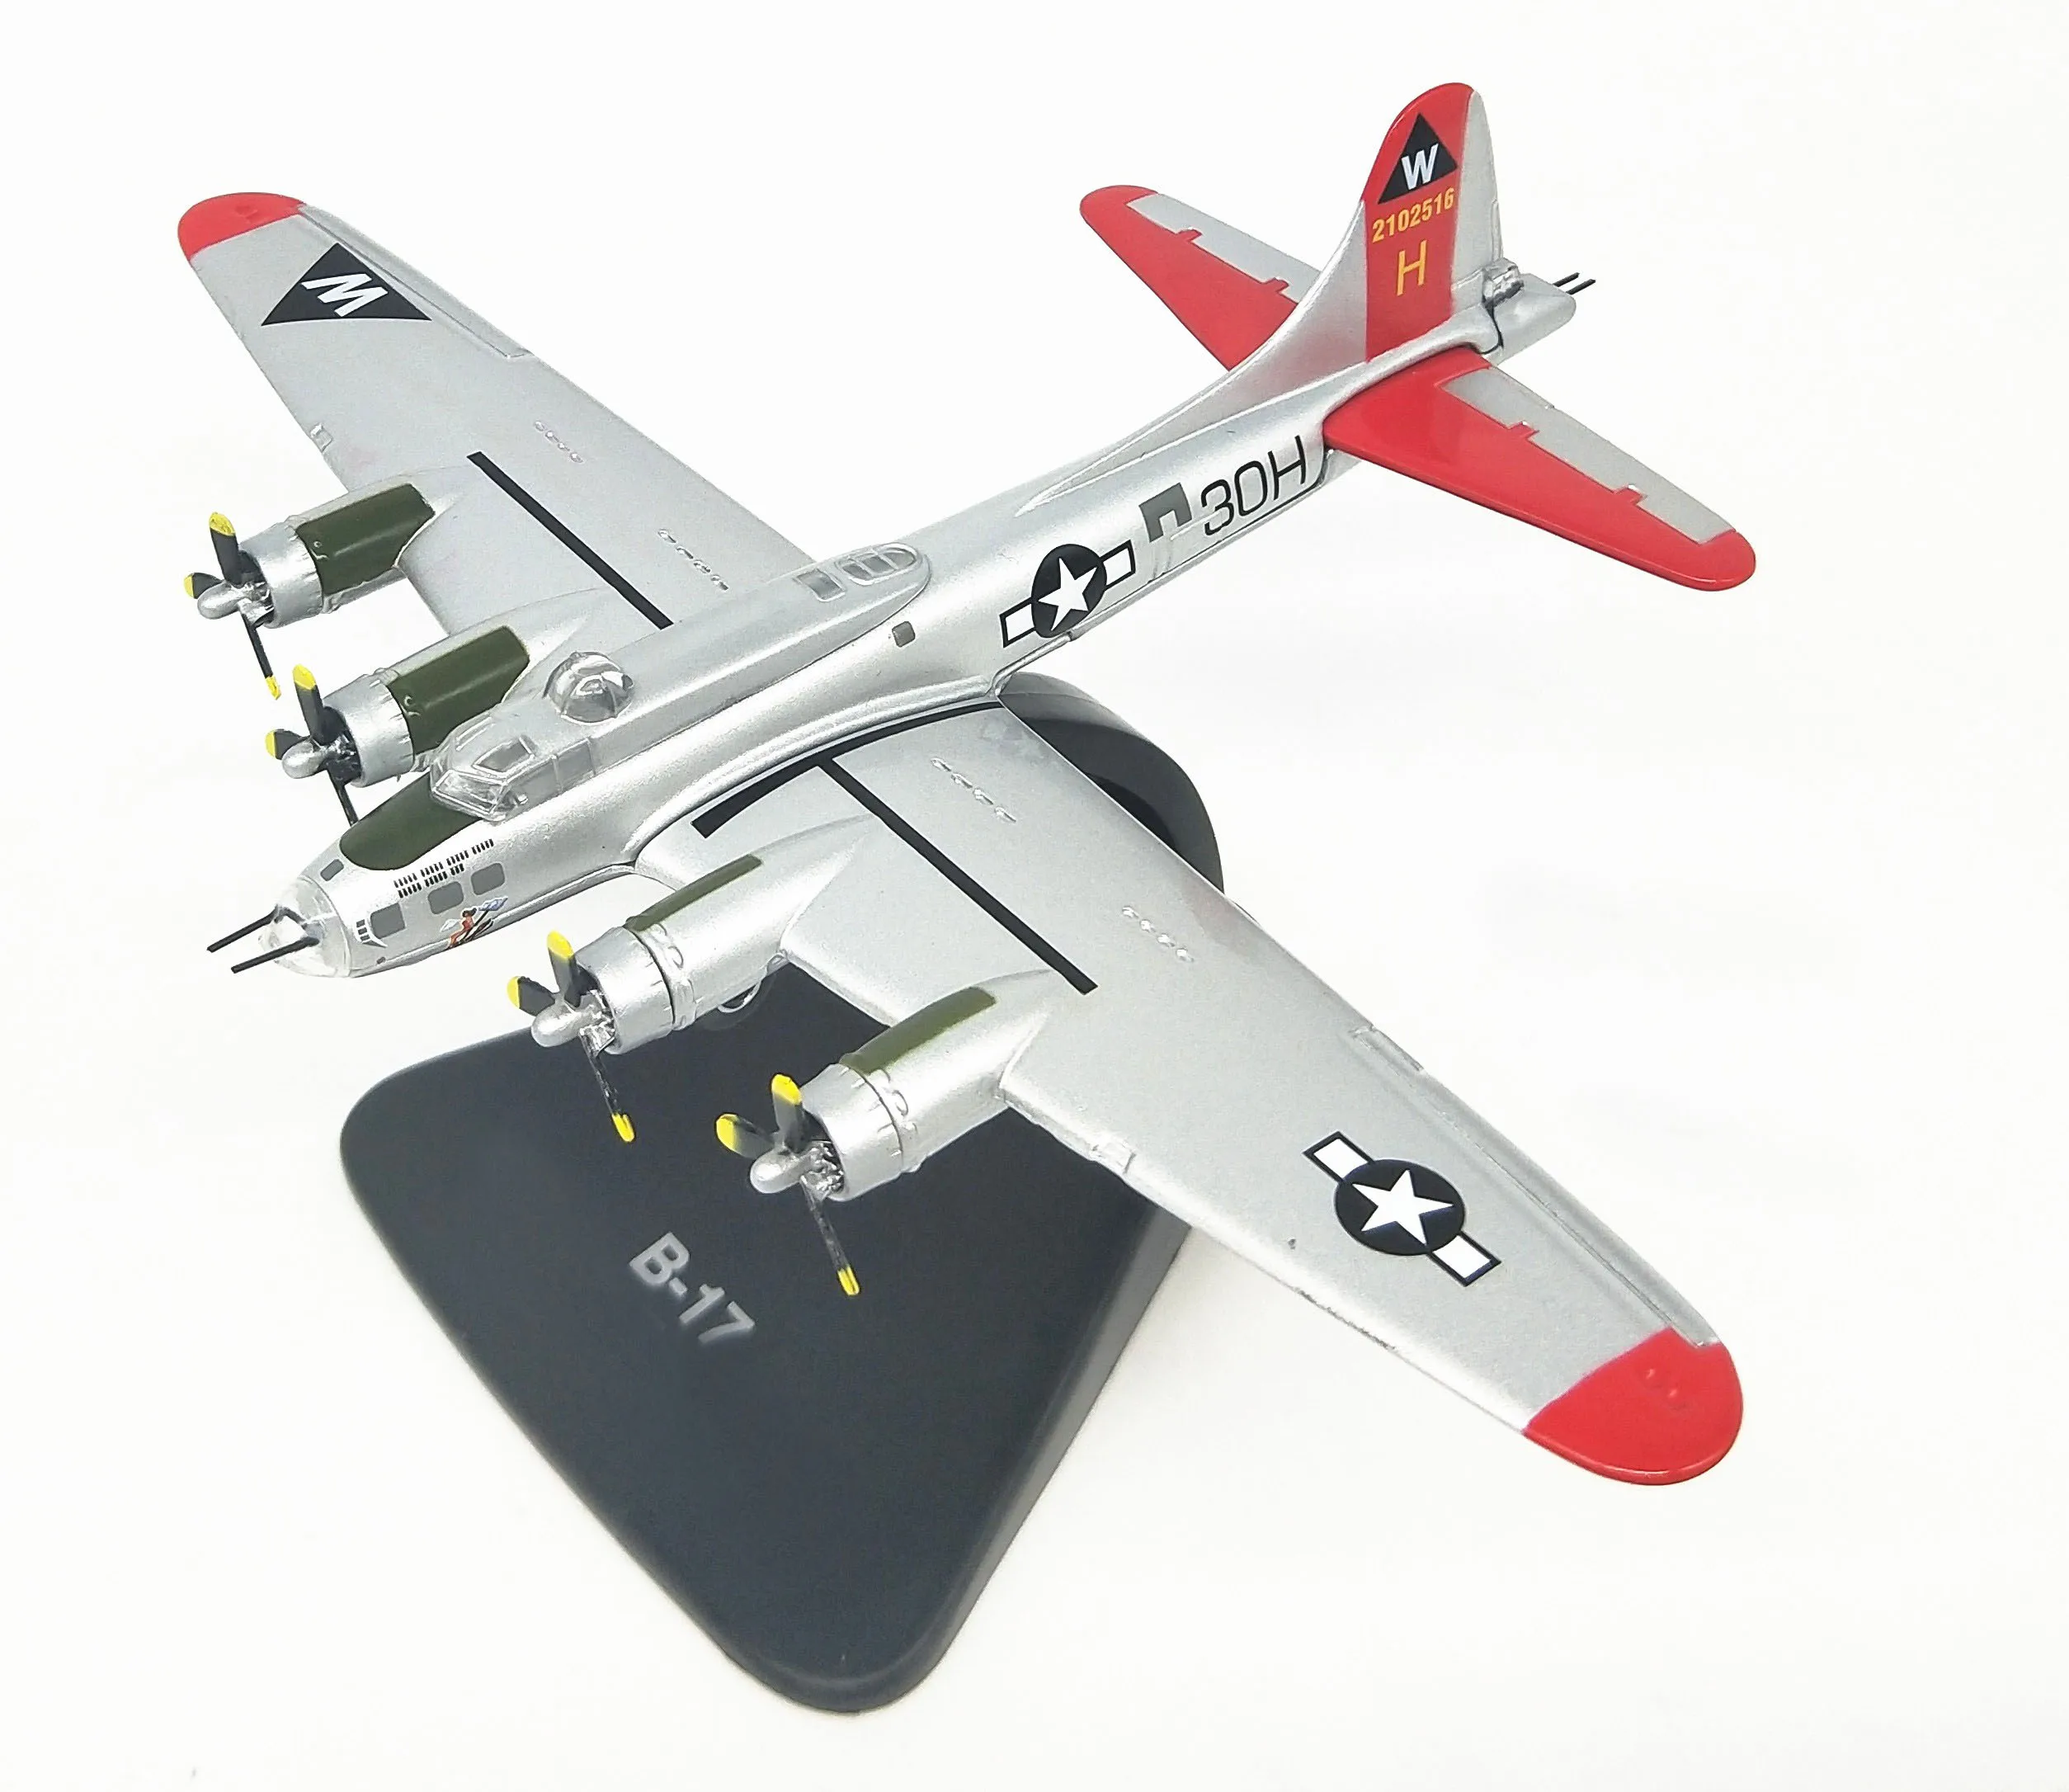 

rare Special Offer 1:144 World War II America B-17 Bomber Model Alloy finished products Collection Model Only red